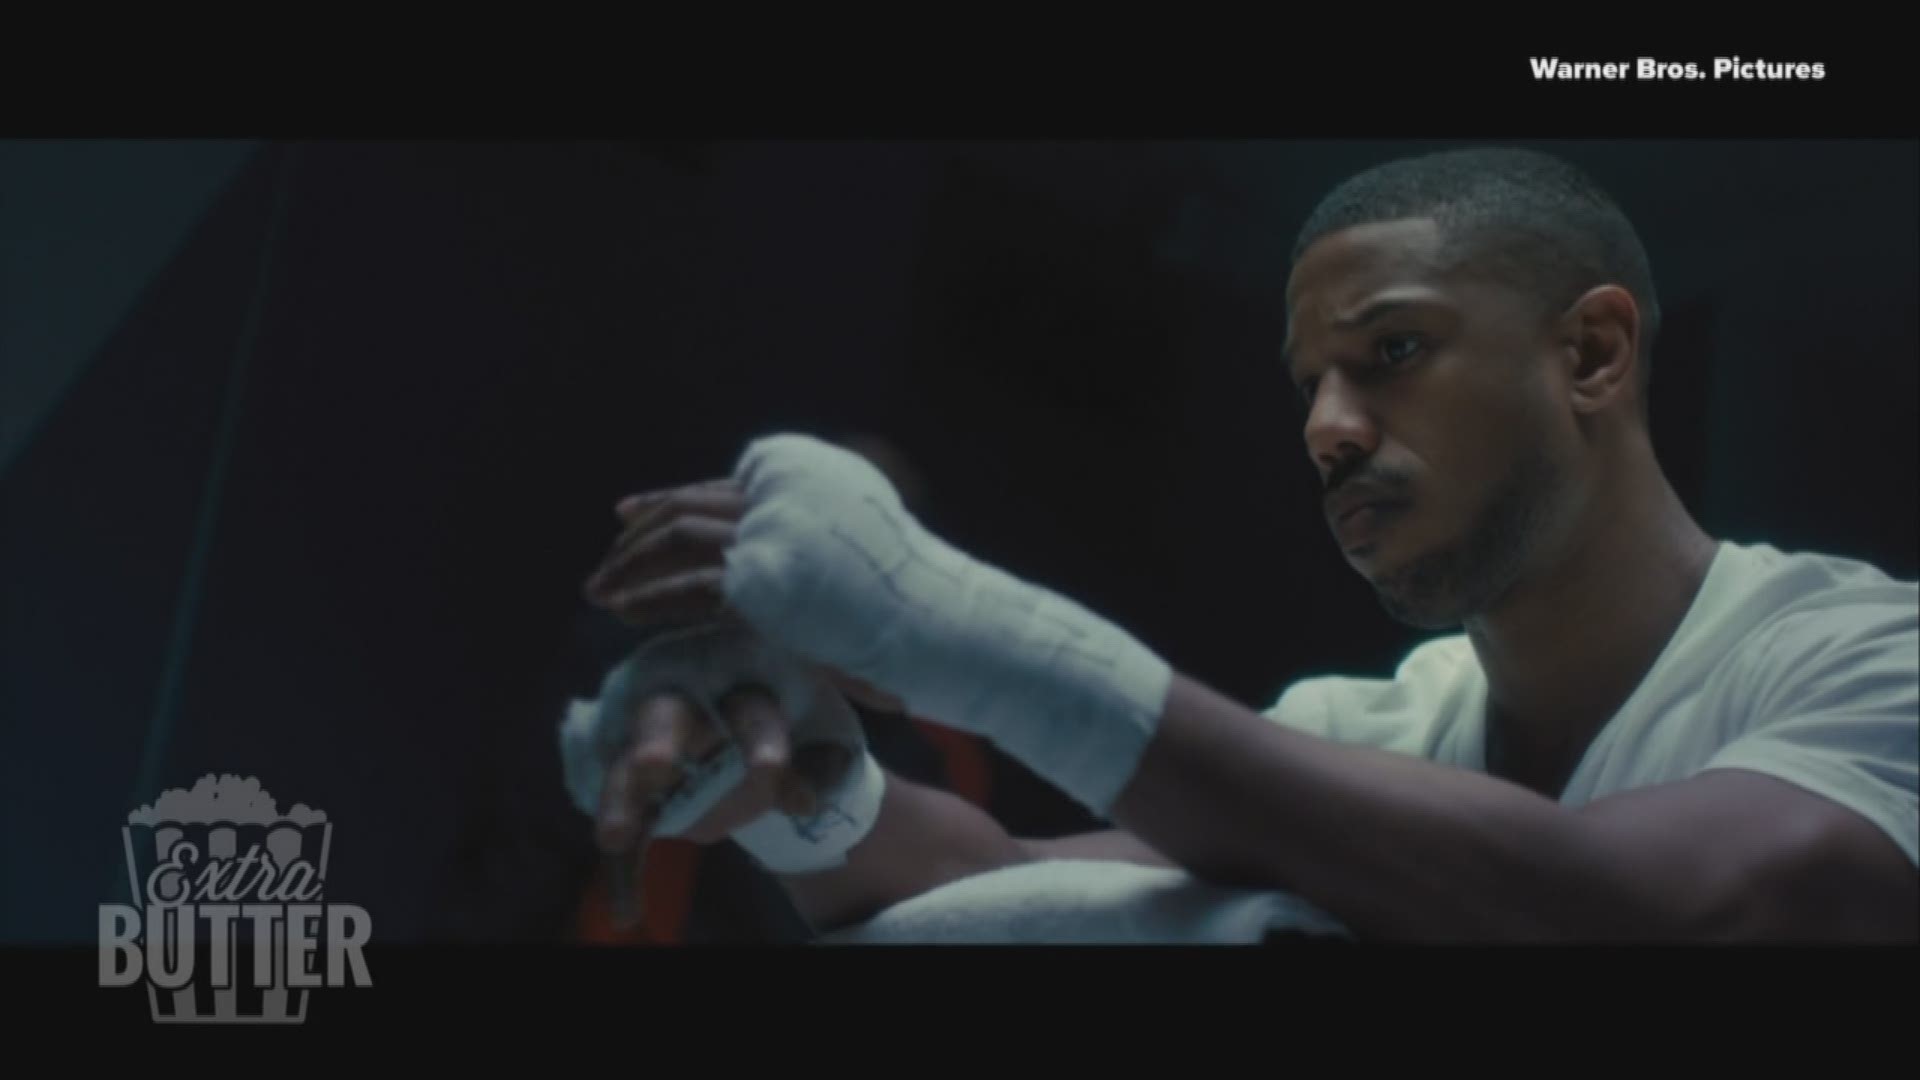 Extra Butter reviews two movies now available to watch at home. Michael B. Jordan talks about 'Creed II,' a movie the panel says is a lot like Creed, but that's not necessarily a bad thing. Also, gather the family to watch 'Instant Family,' a movie with a lot of laughs and a lot of heart. Mark Wahlberg tells Mark S. Allen about what it is like to be a dad and why his nieces and nephews might want to watch out. Interviews provided by Warner Bros. Pictures and Paramount Pictures.